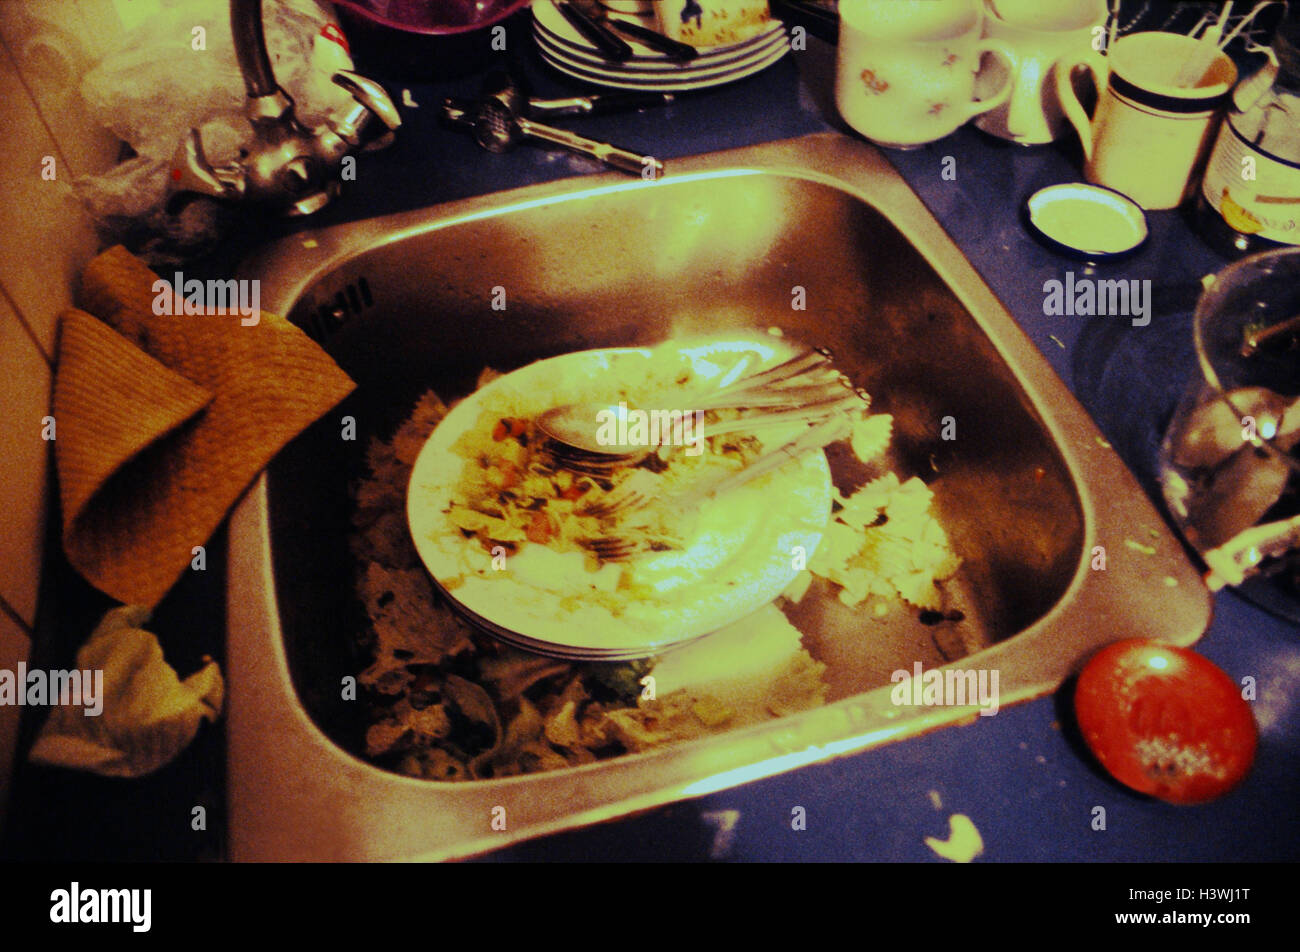 Cuisine, detail, sink, dishes, dirtily, leftovers, inside, household, sink, food leftovers, Washing, unhygienically, squalidly, housework Stock Photo